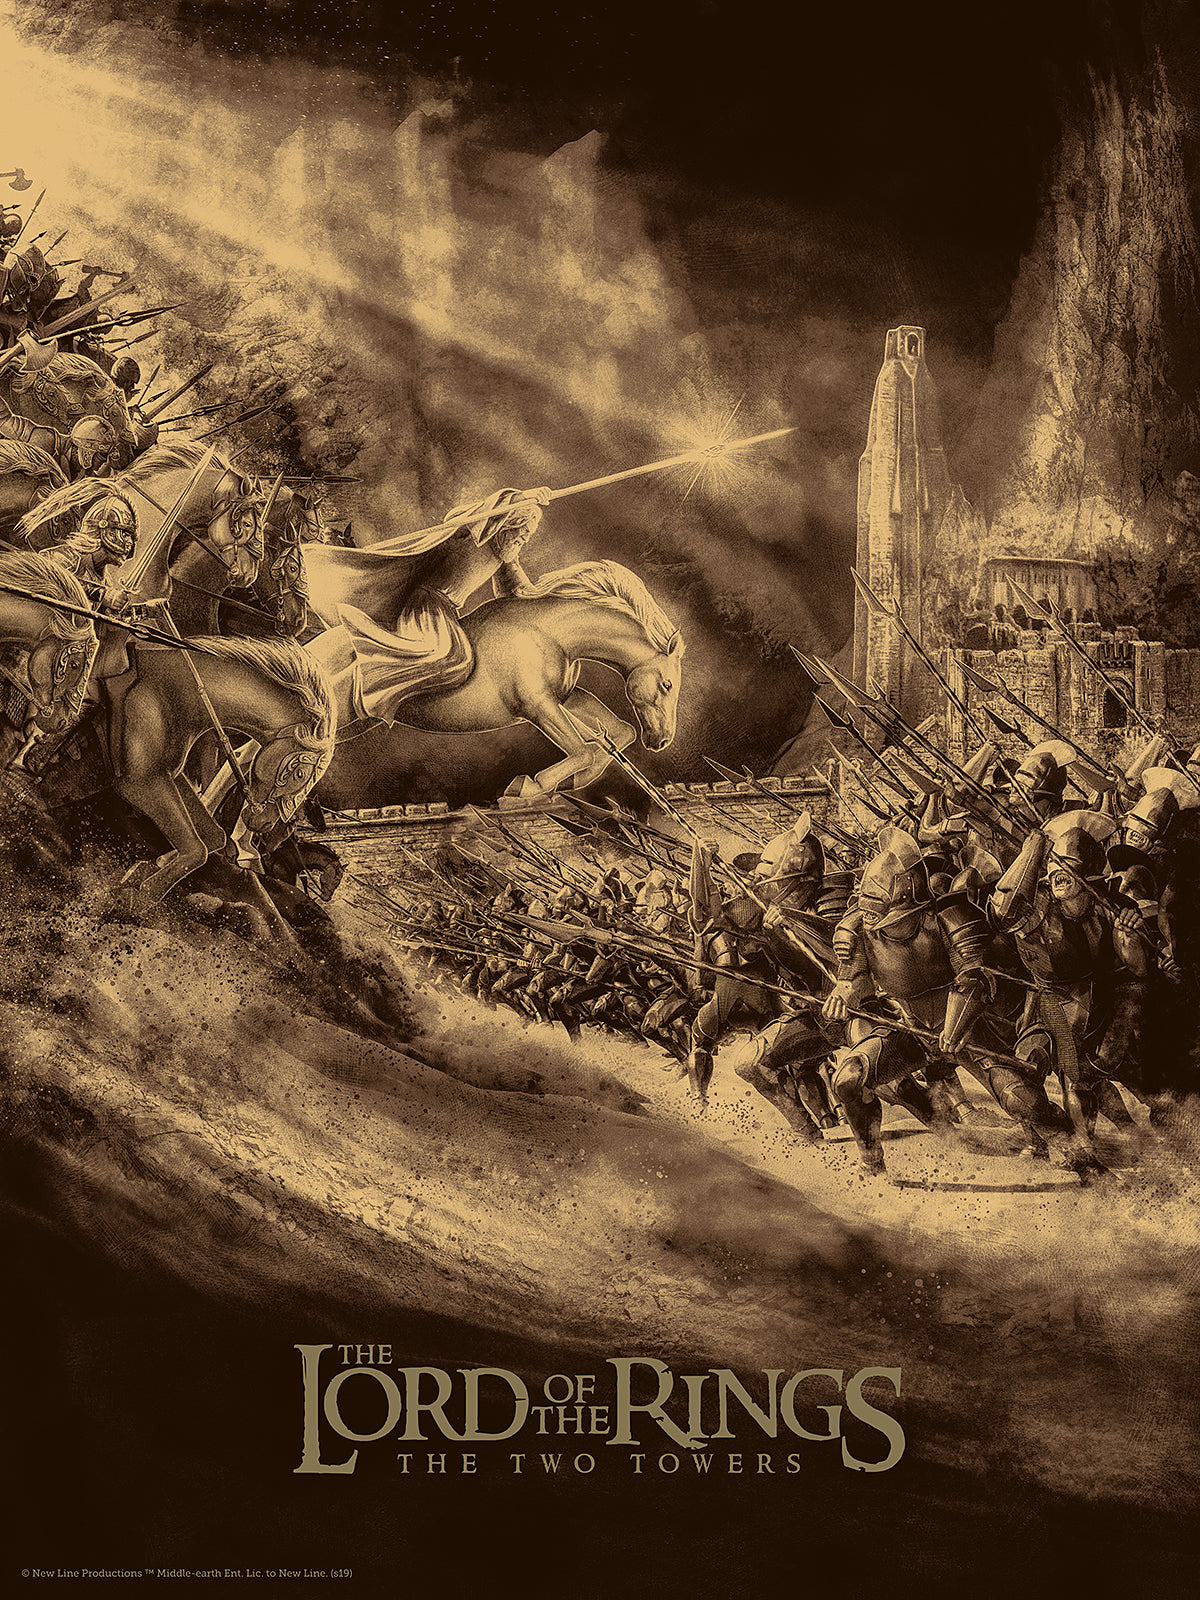 Chris Skinner "The Lord of the Rings: The Two Towers" Foil Variant